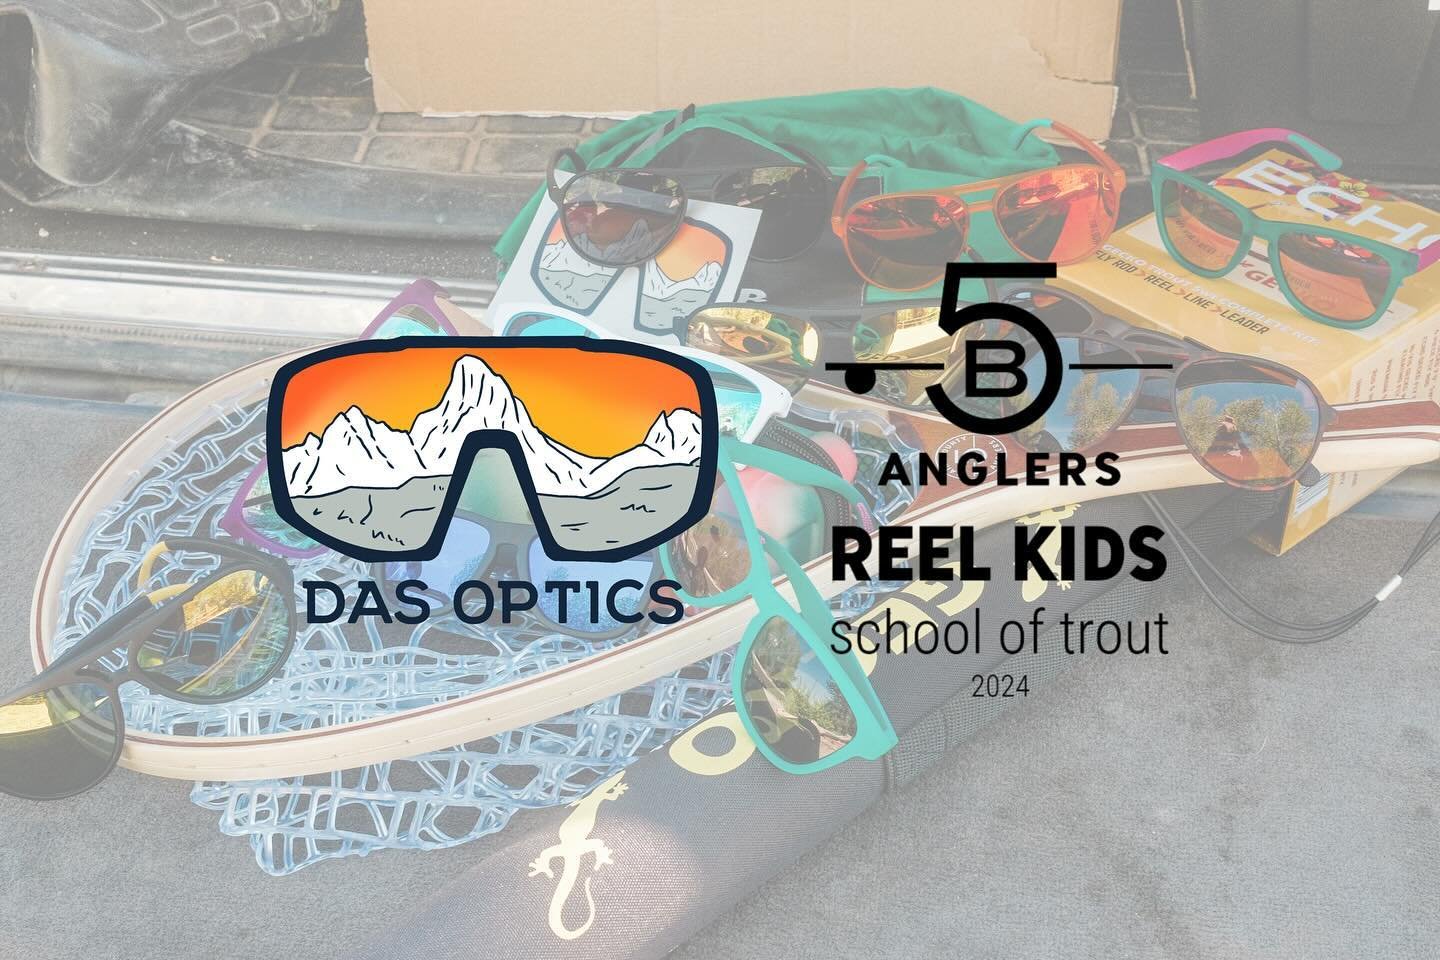 Have you heard about our partnership with @das_optics yet??

DAS optics generously provided a pair of polarized kids sunglasses for each of our Kids Camp attendees this summer!

Based in Driggs, DAS Optics is the brain child of Chris &ldquo;Jigidy&rd